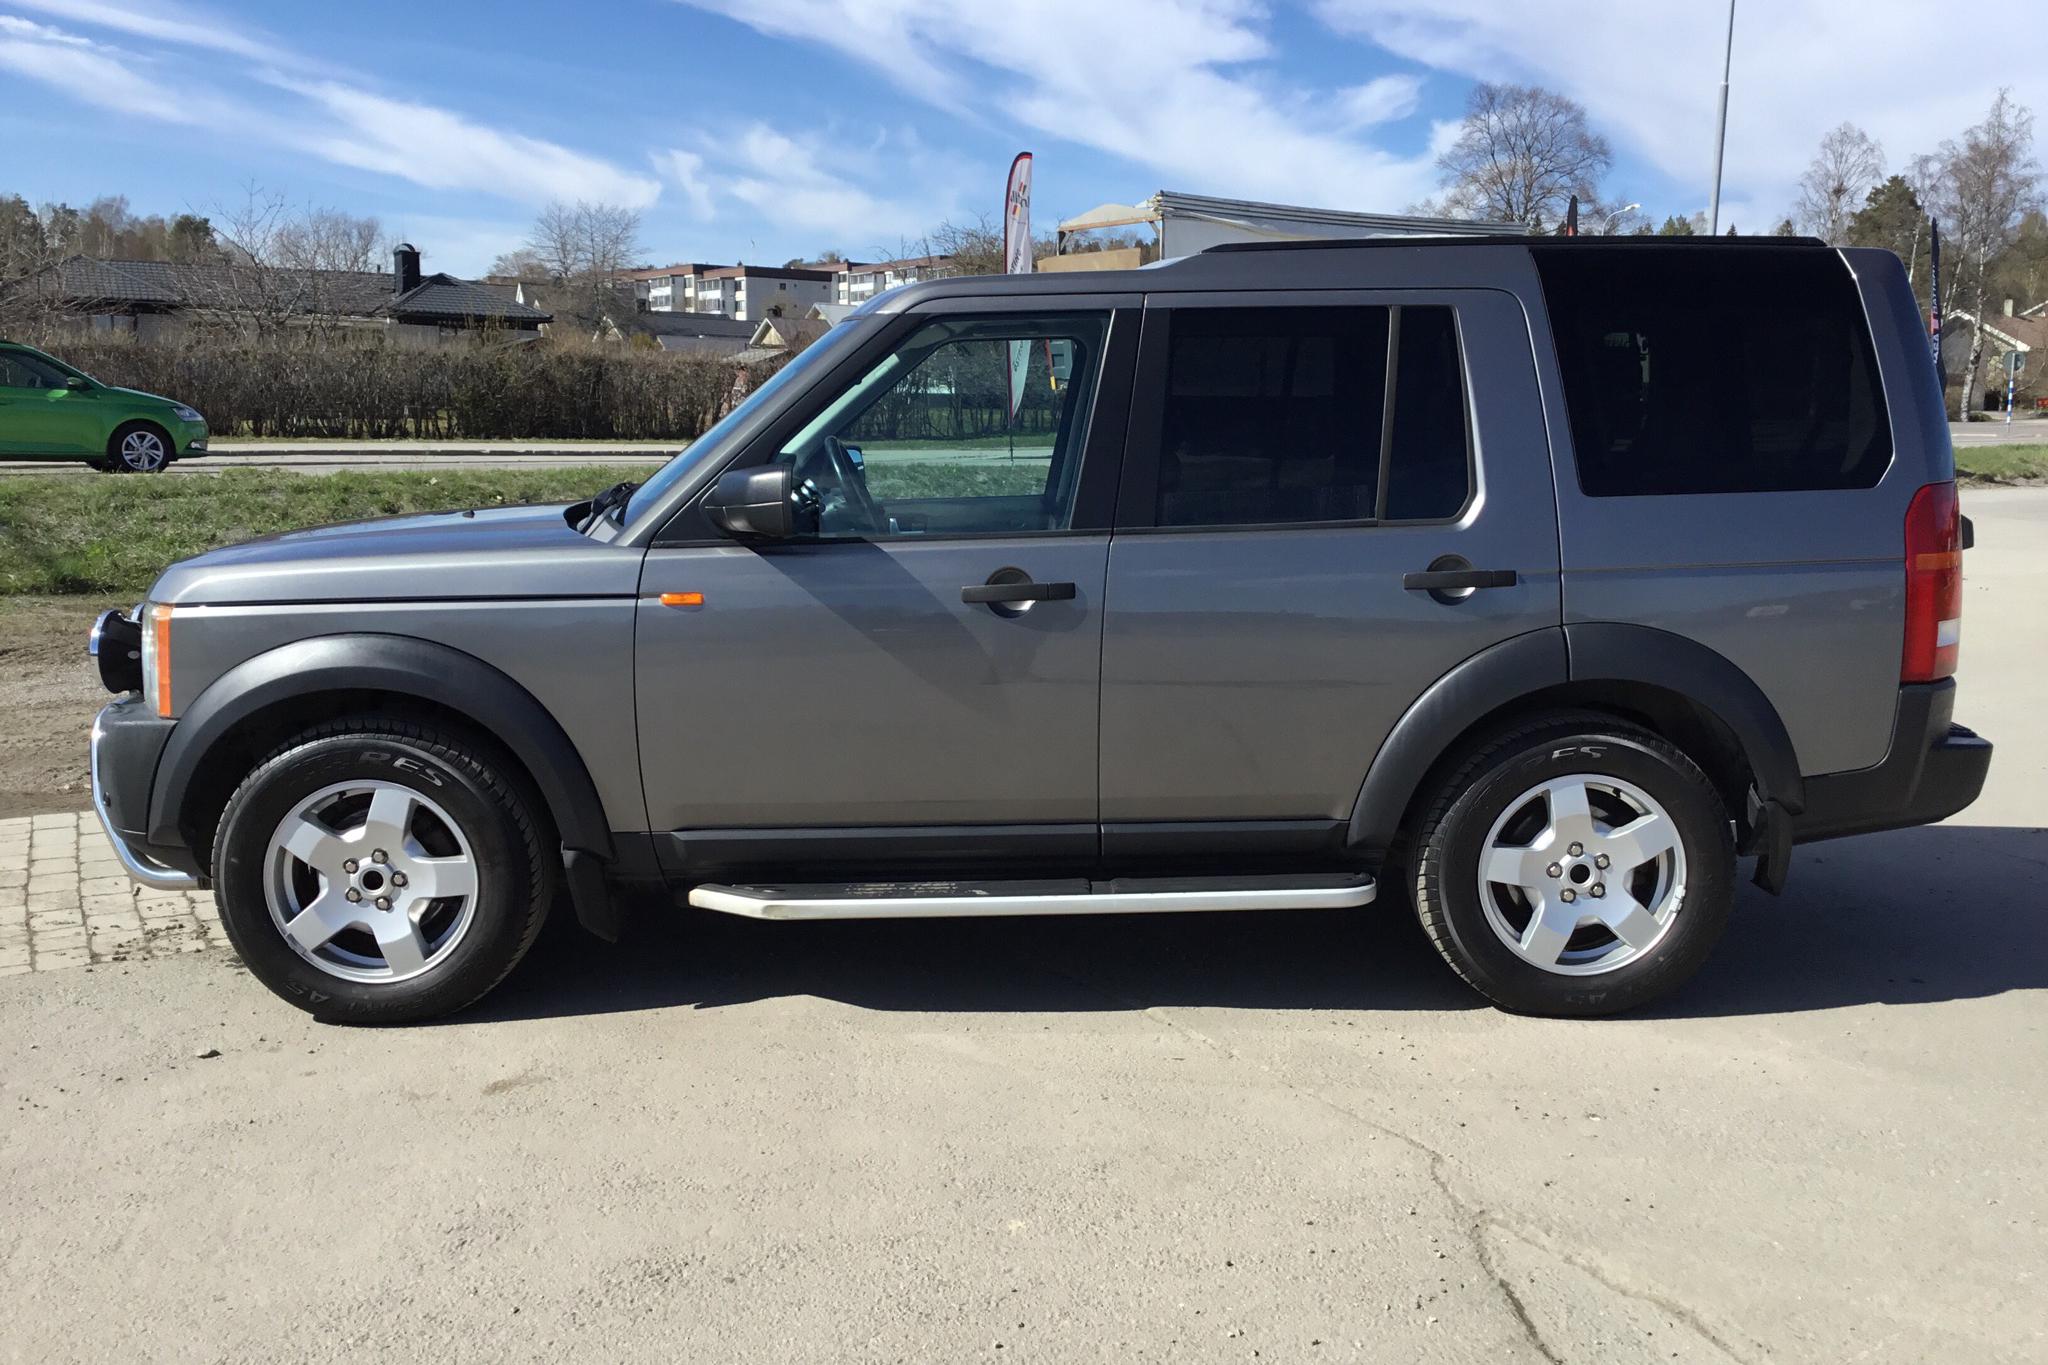 Land Rover Discovery 3 2.7 TDV6 (190hk) - 173 620 km - Automatic - gray - 2008